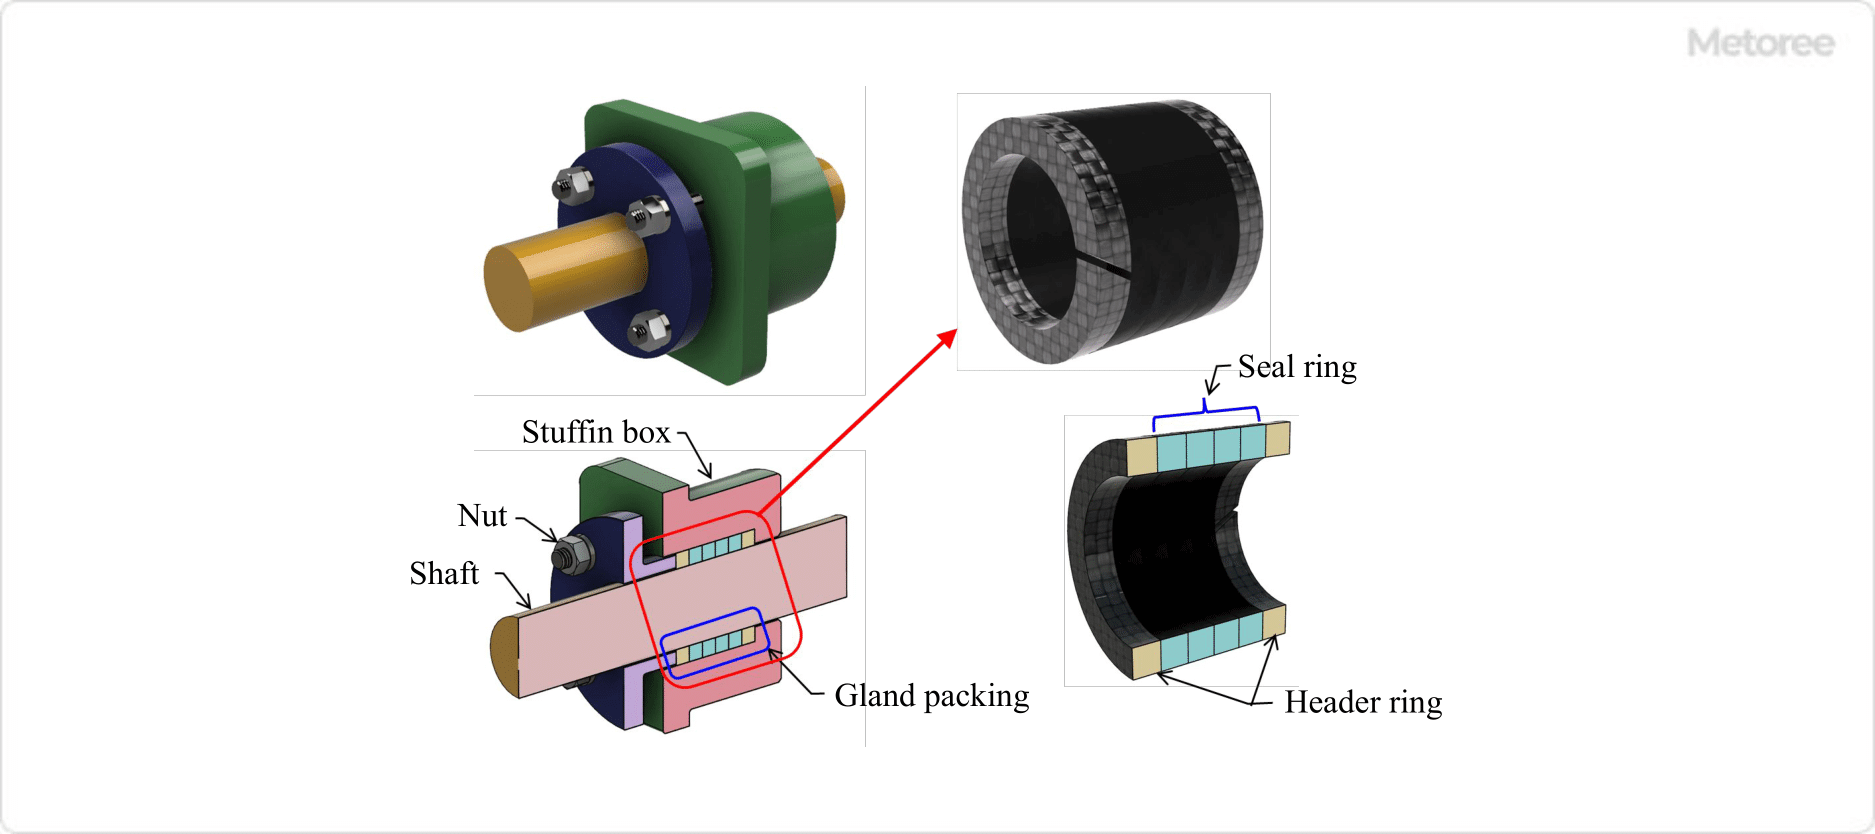 Figure 2. Example of gland packing use